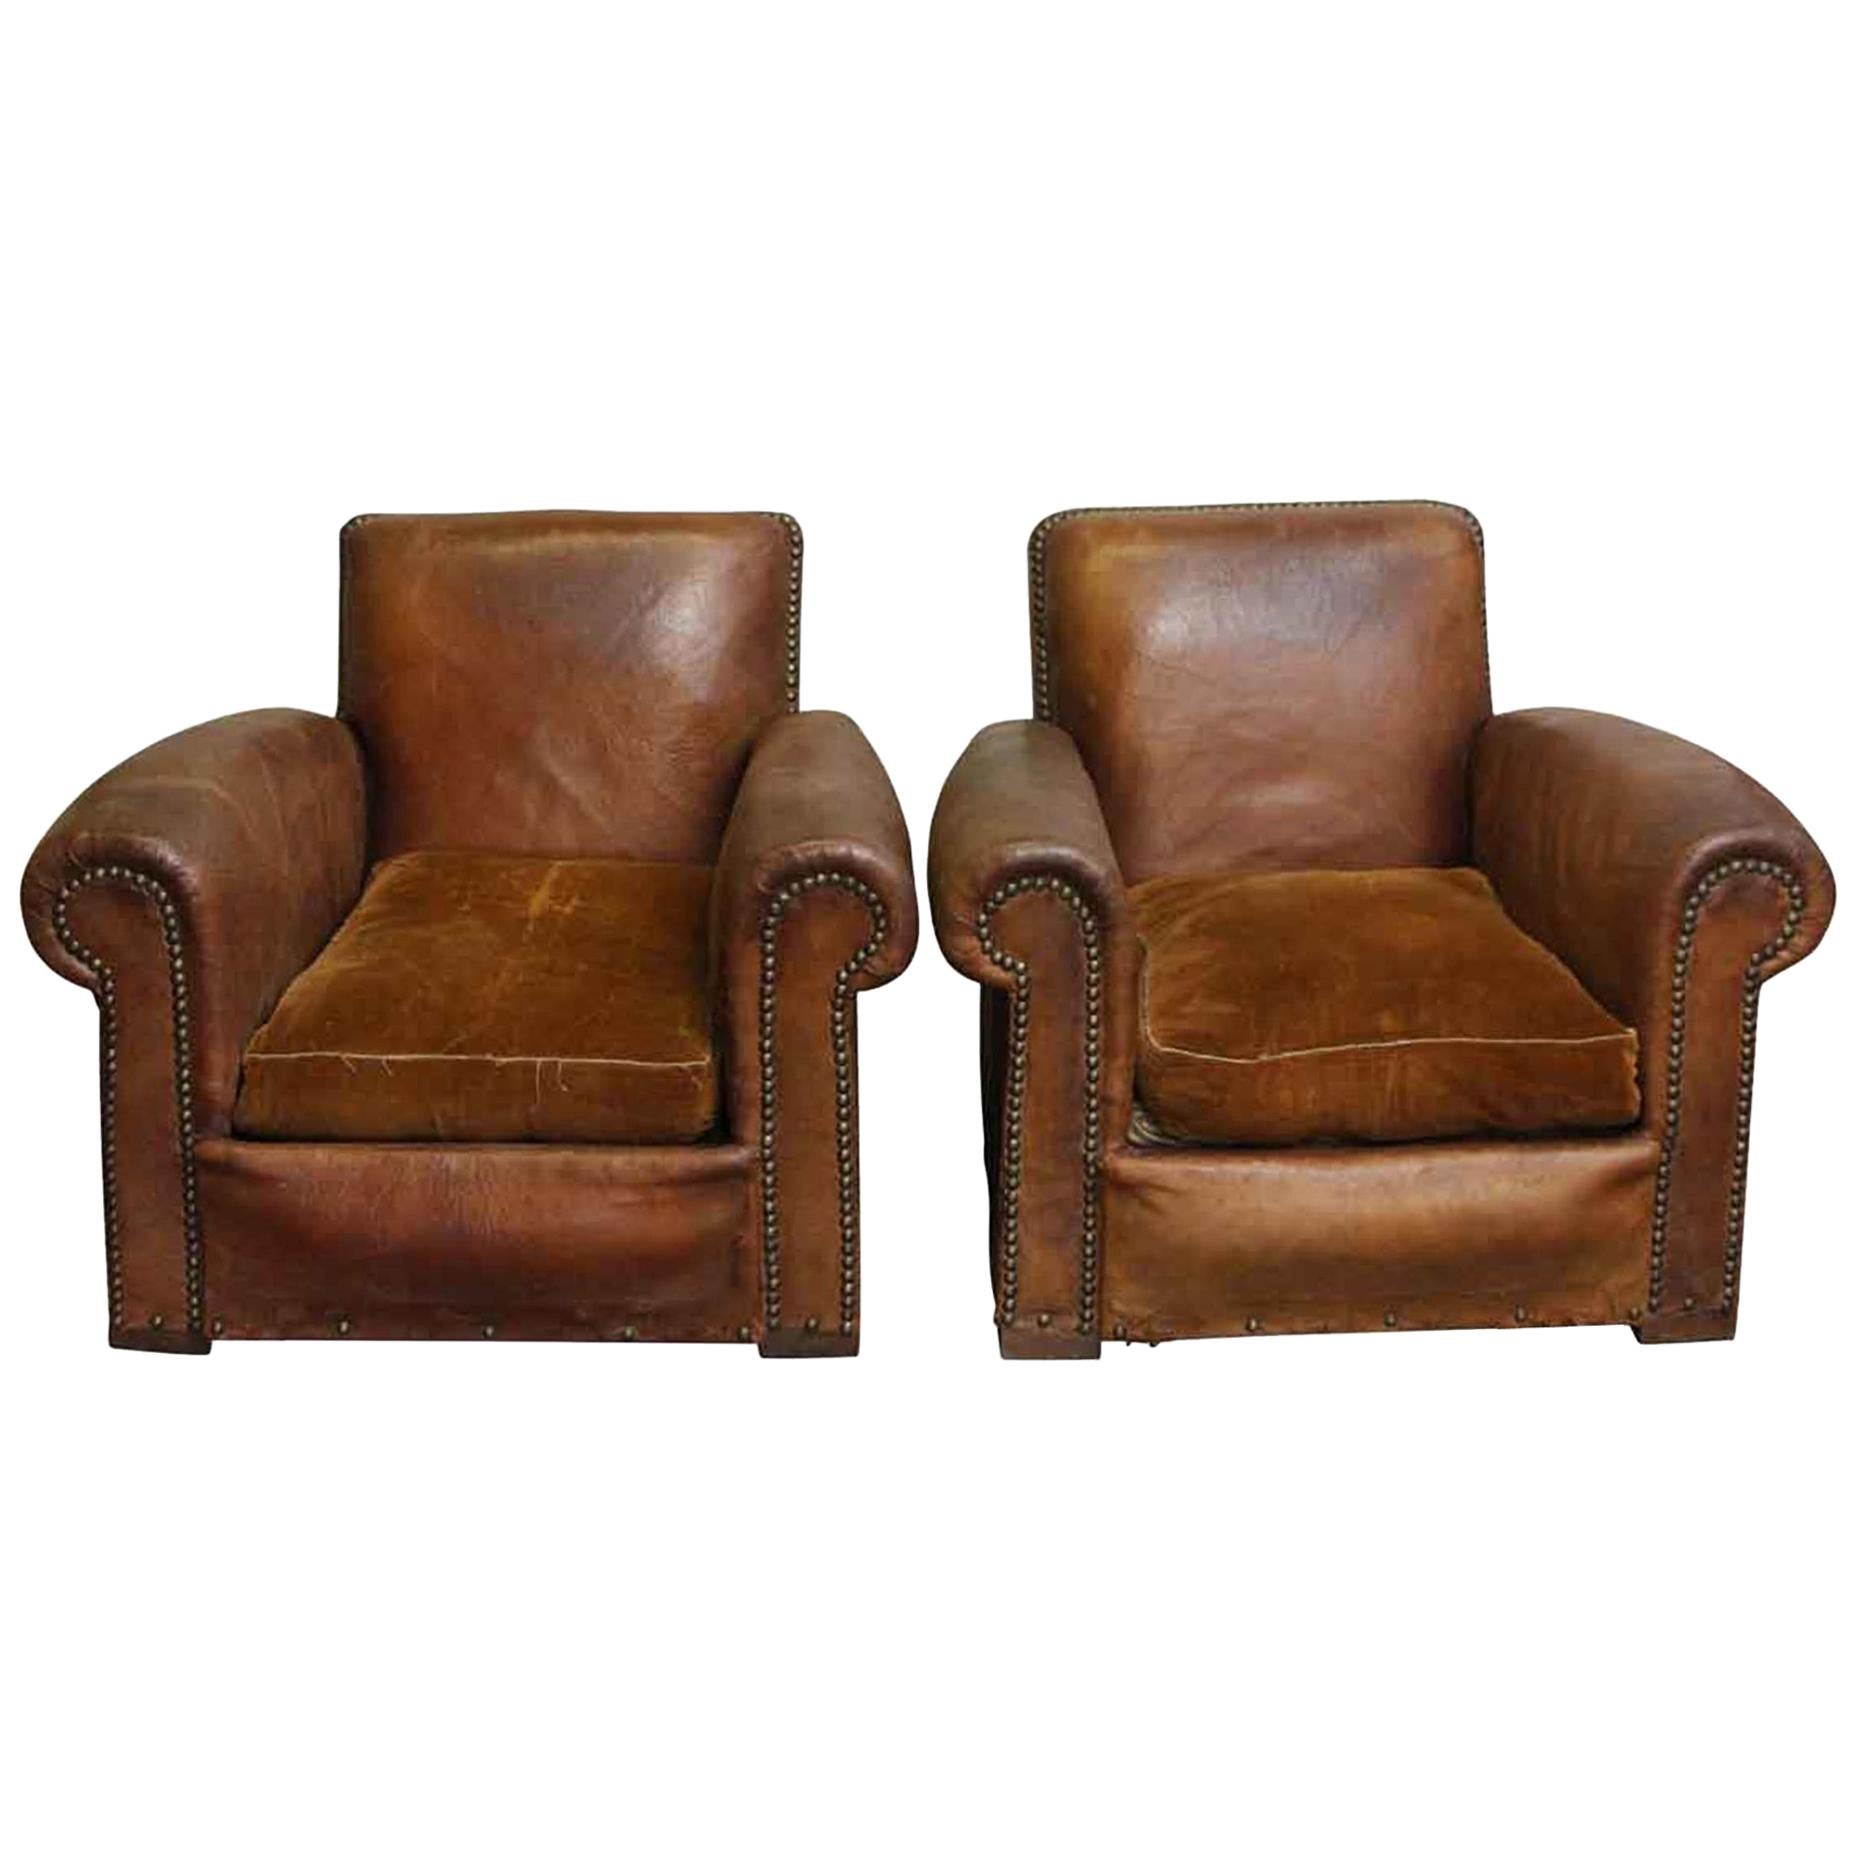 1980s Pair of French Beefy Leather Club Chairs